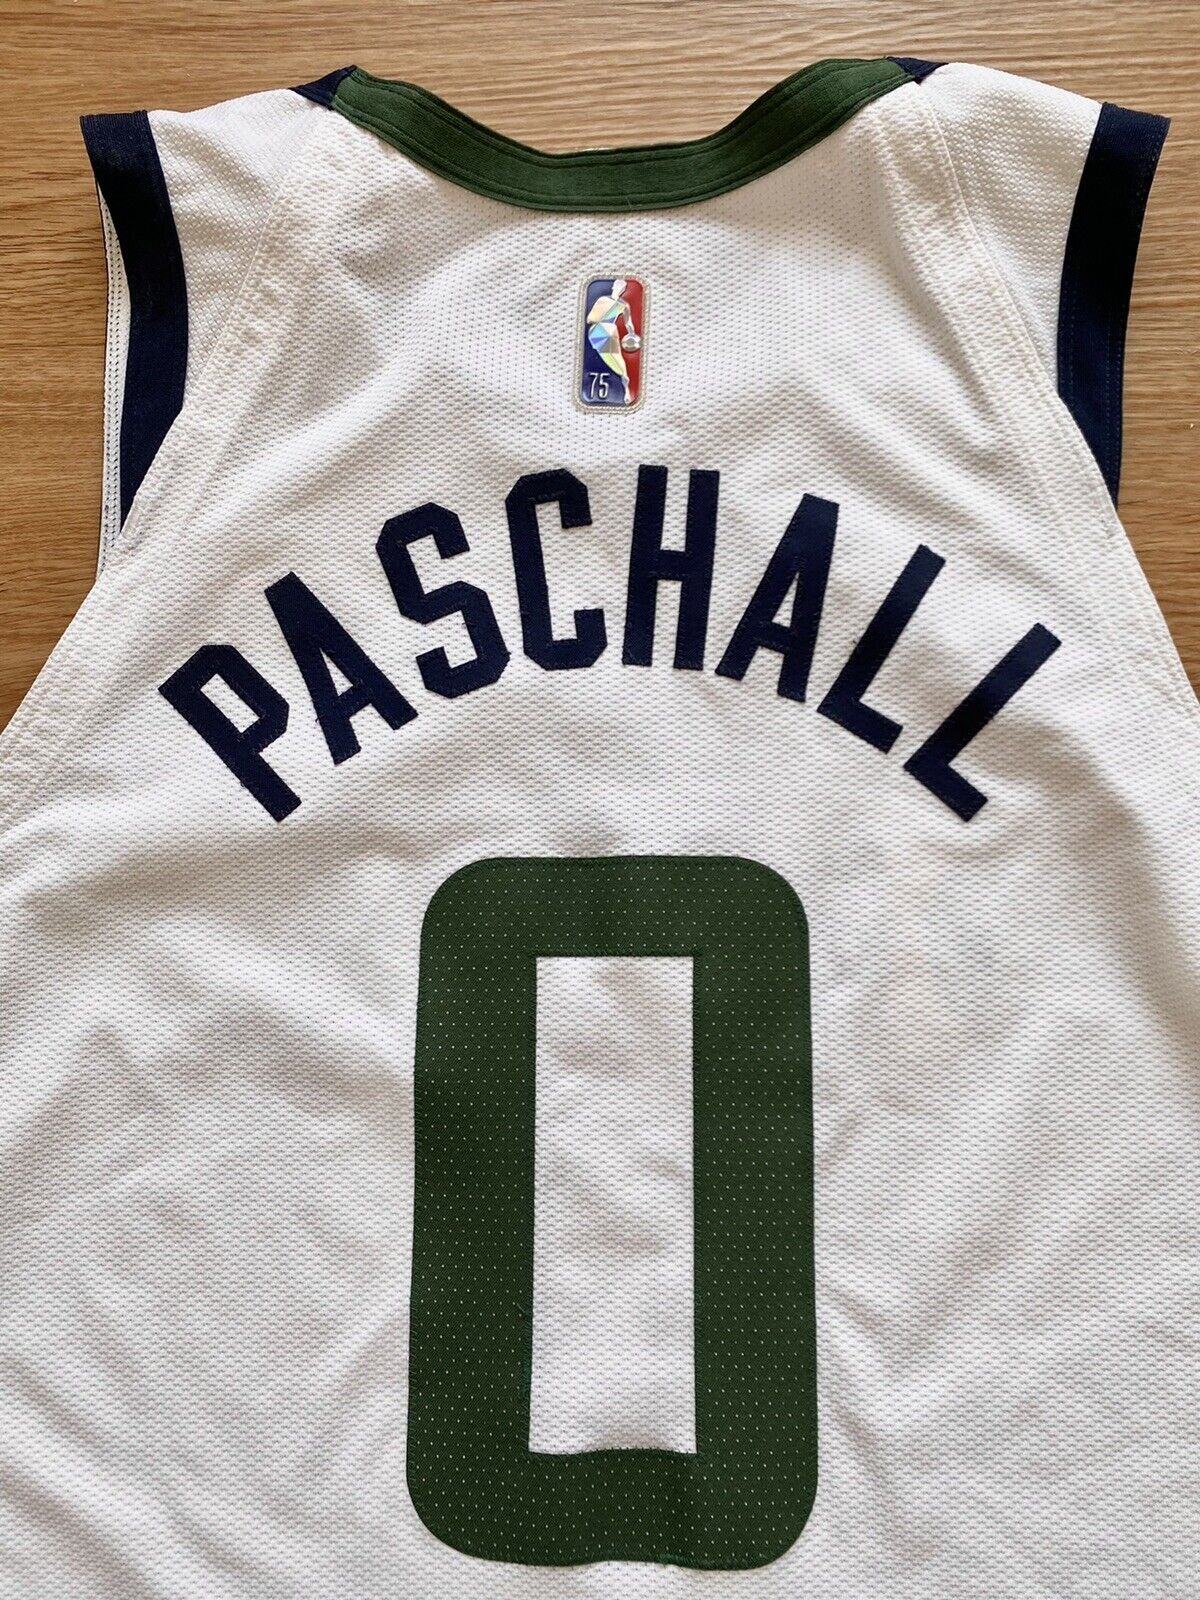 Eric Paschall Utah Jazz Game-Used #0 White Jersey vs. Golden State